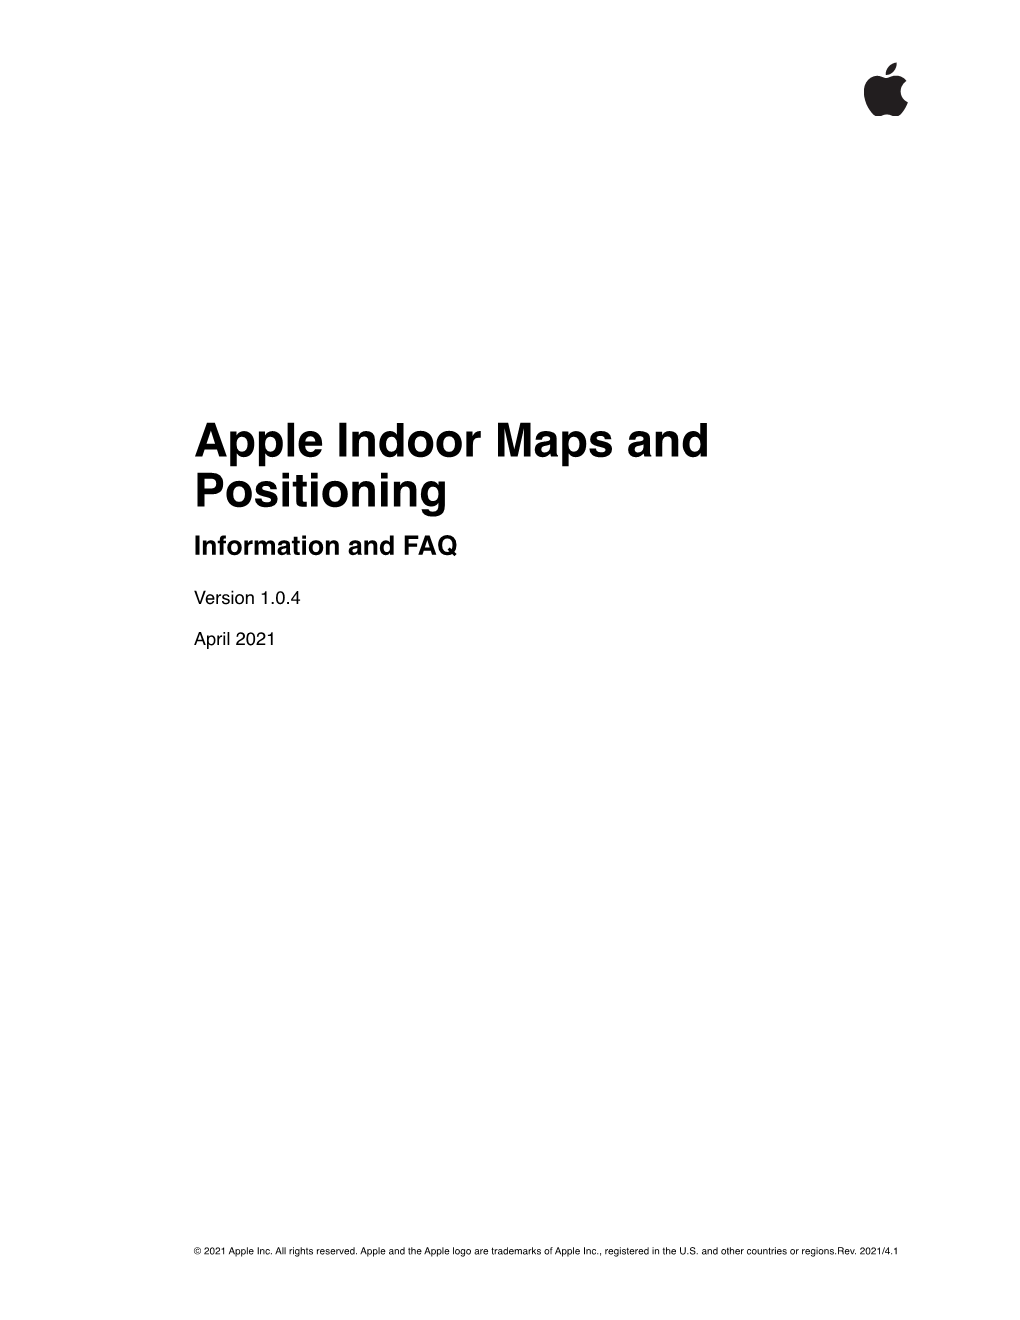 Apple Indoor Maps and Positioning Information and FAQ